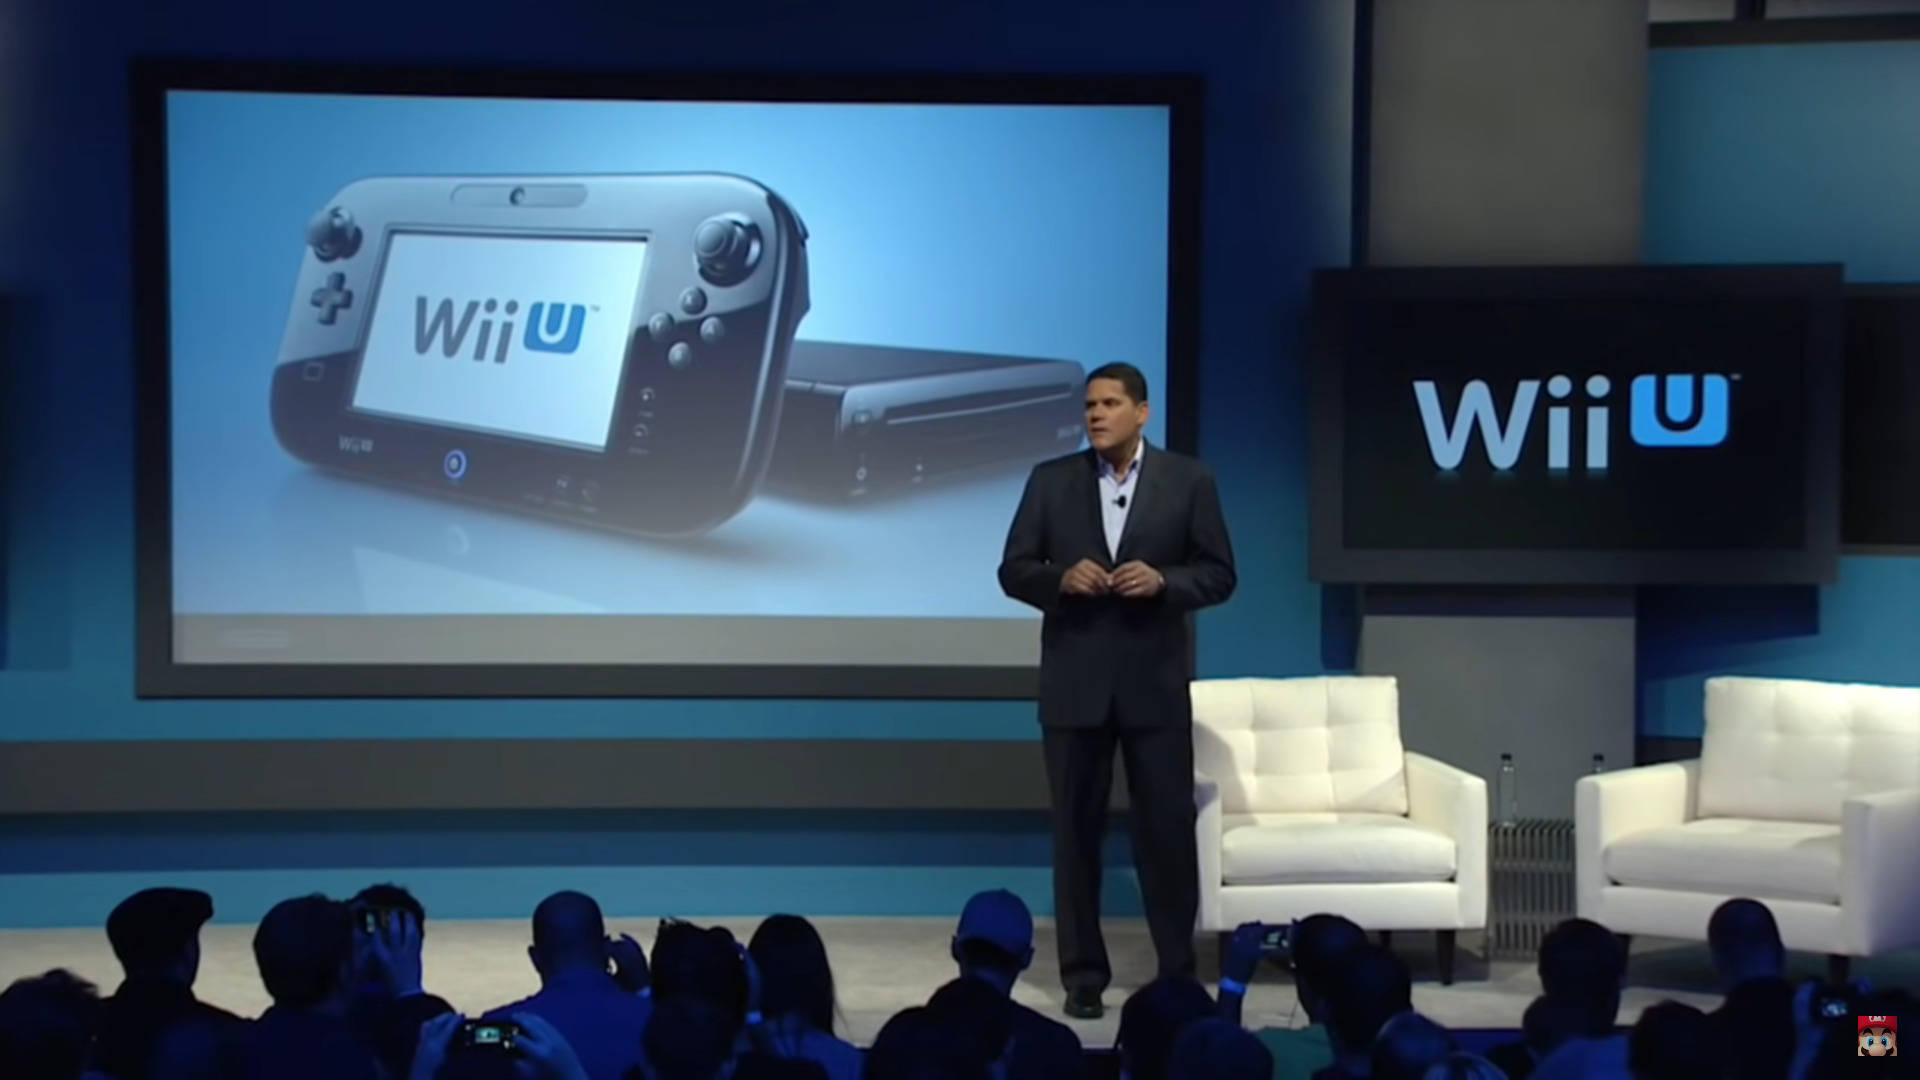 Reggie Fils-Aime speaks at a Wii U preview event in 2011